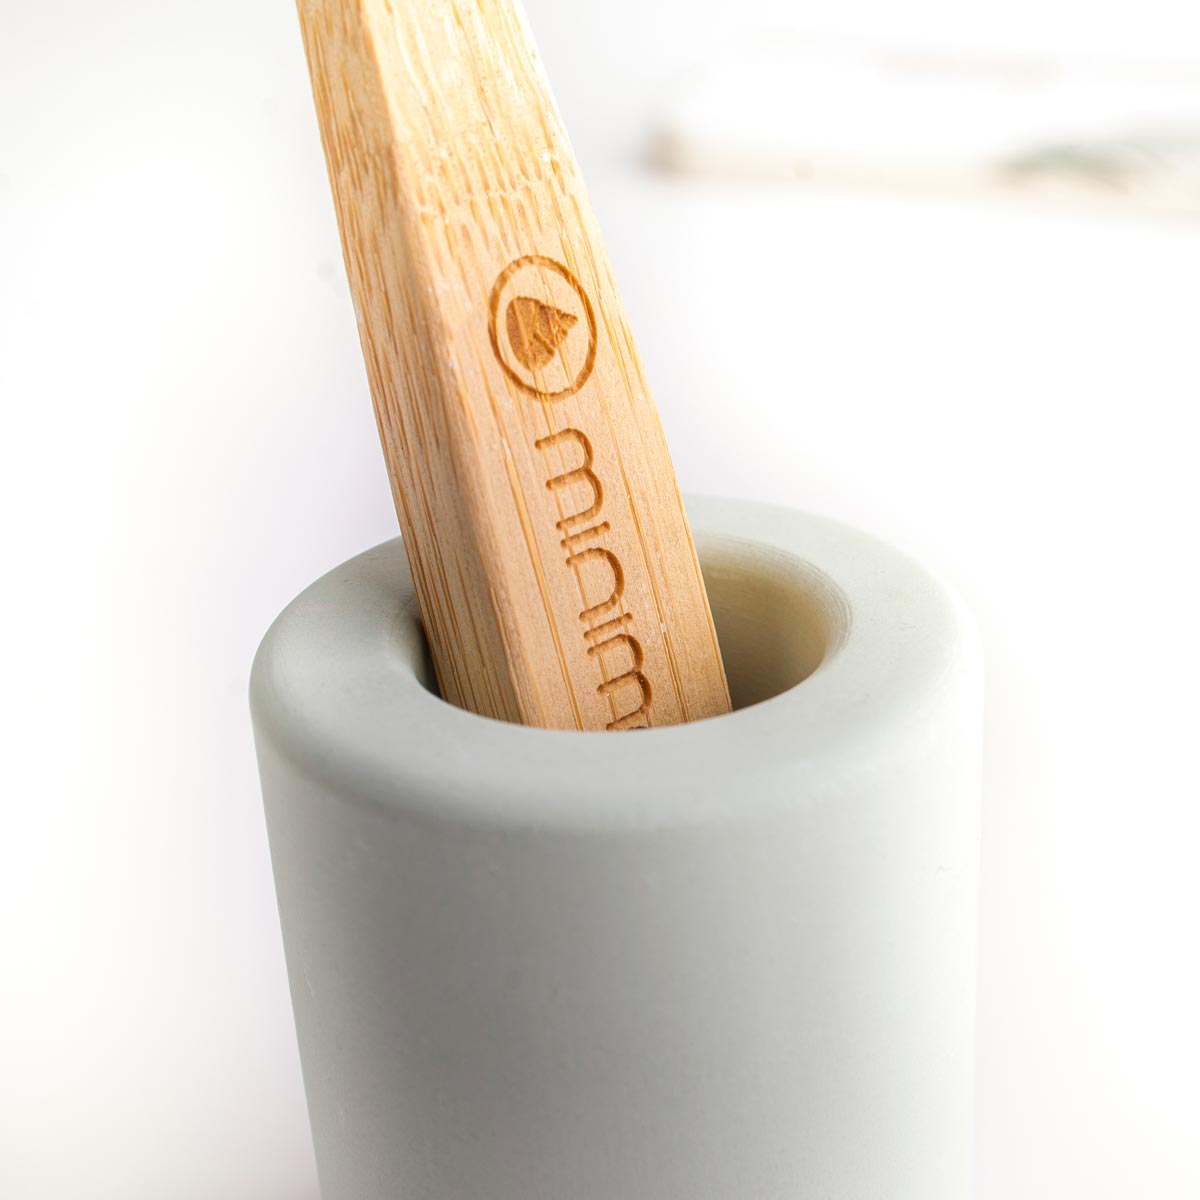 Minimal List Toothbrush Holder from Diatomite and Zeolite